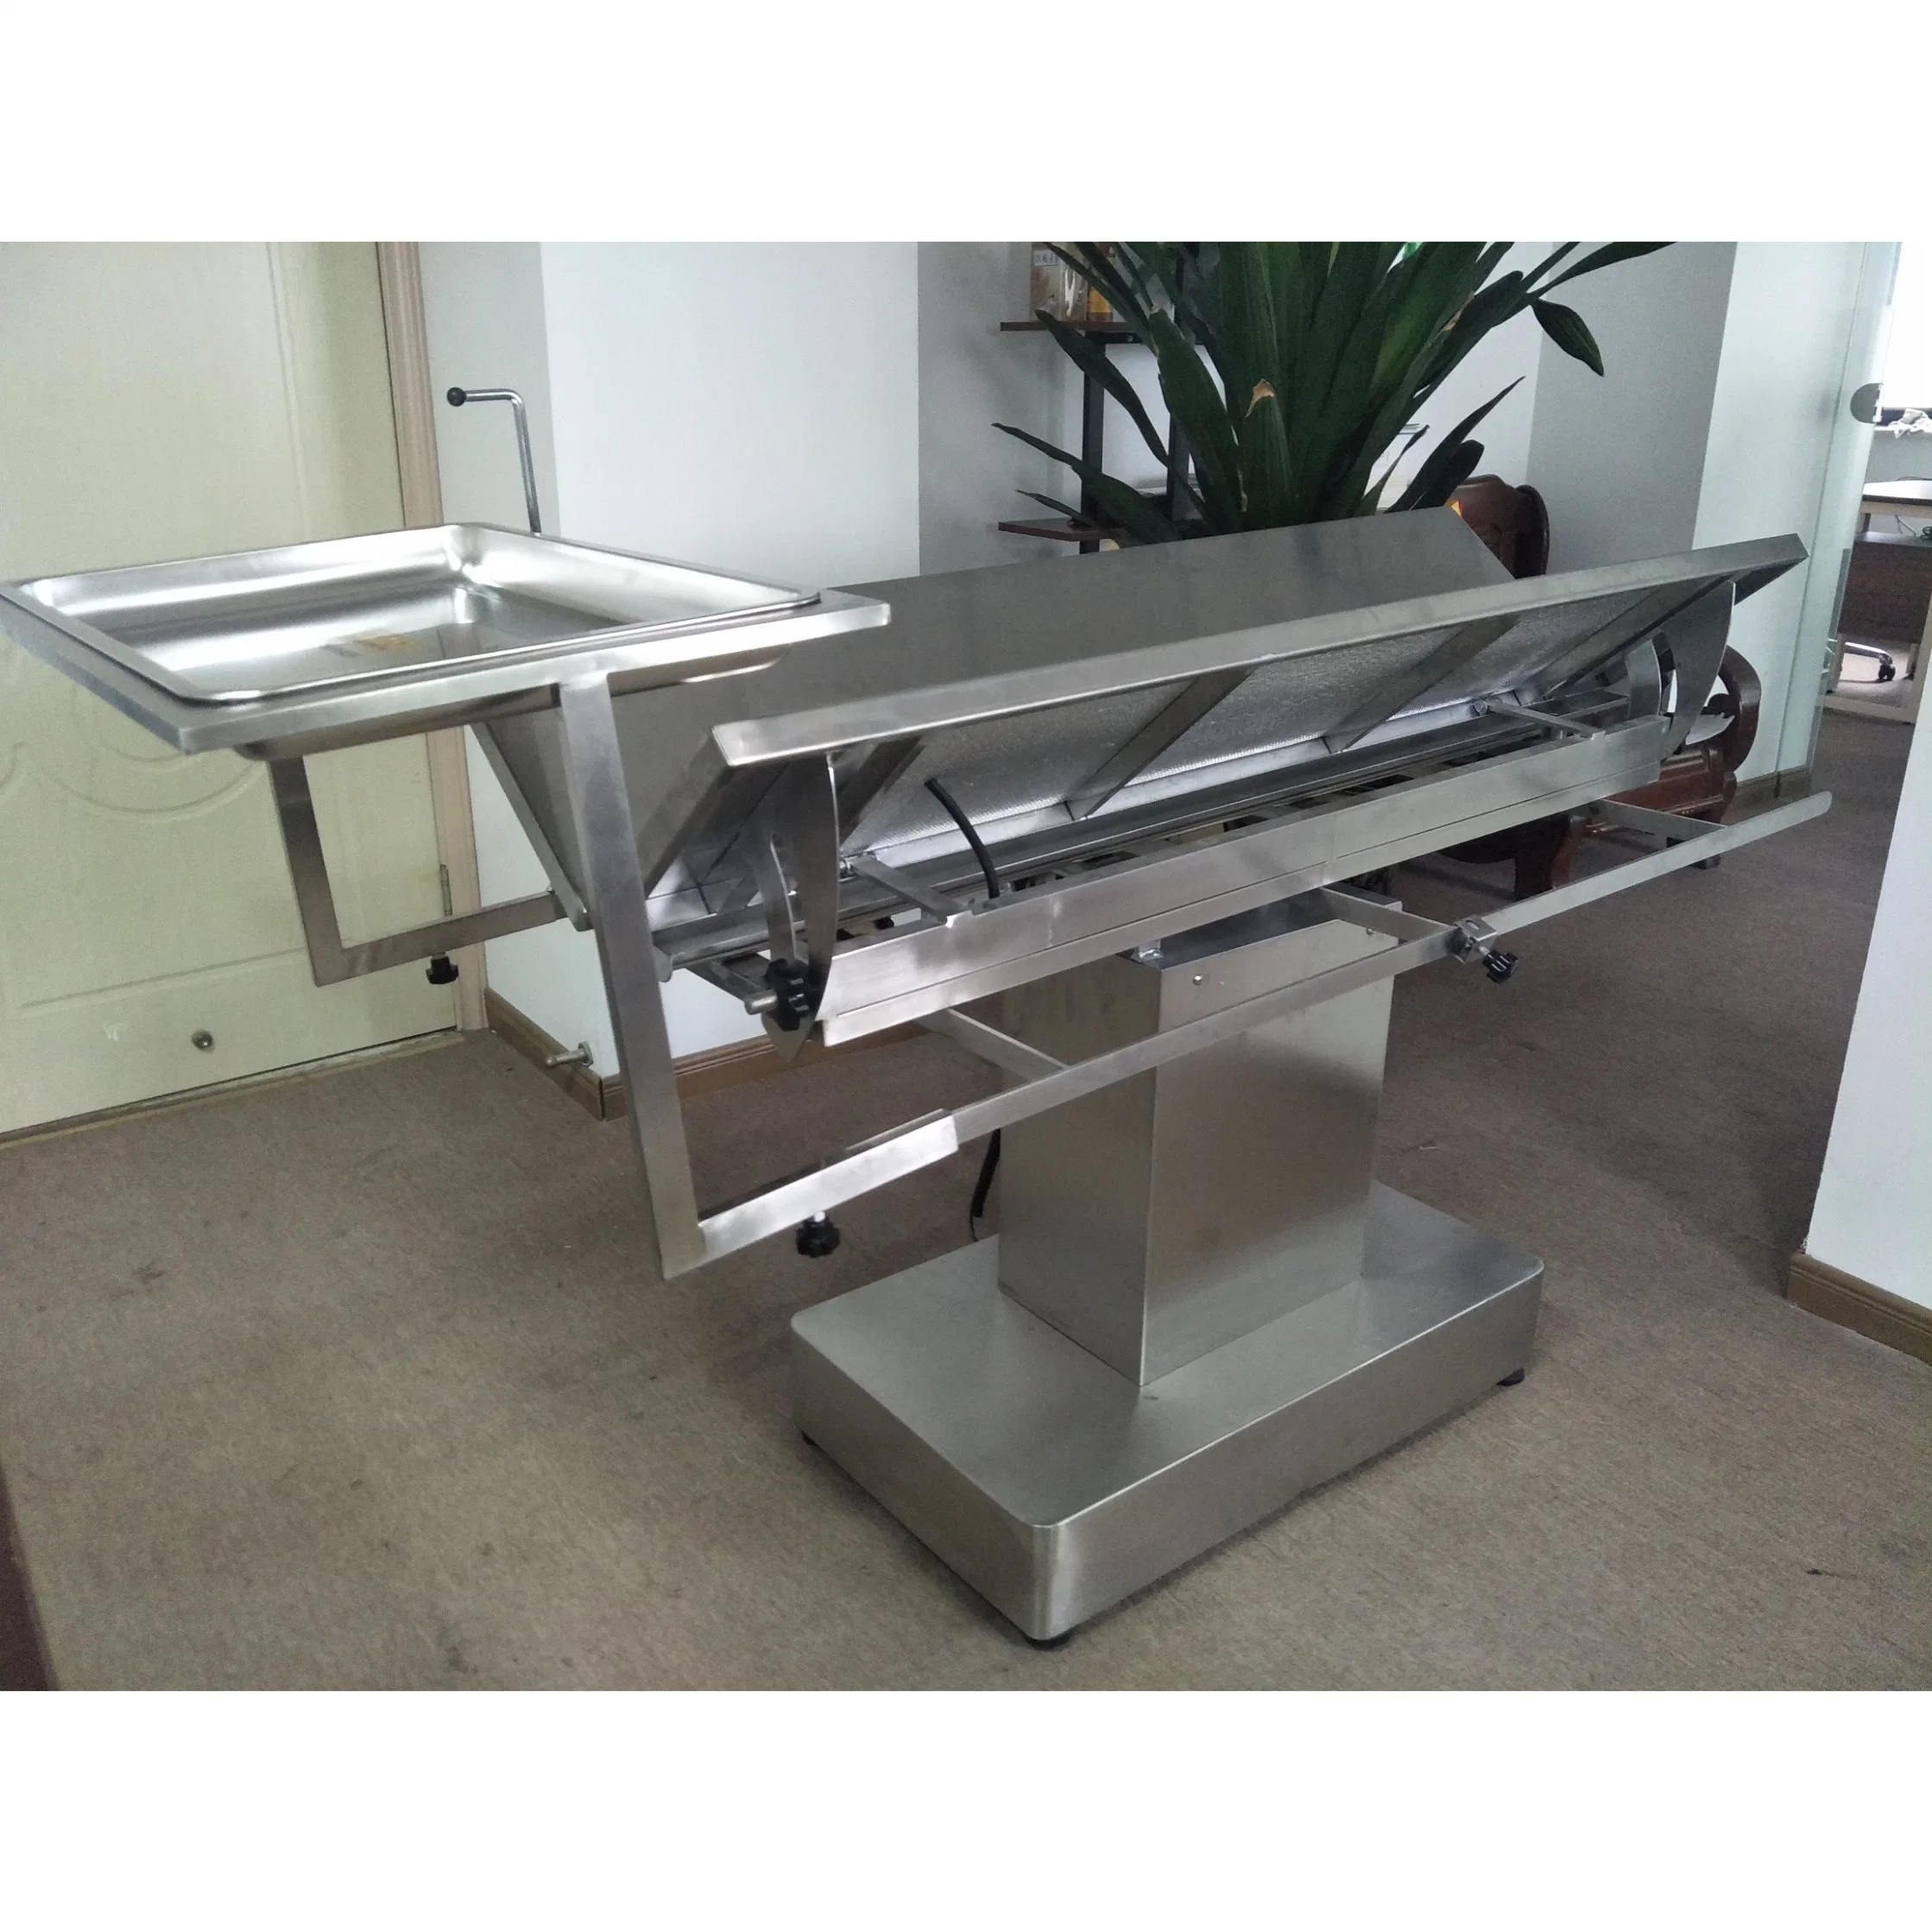 "V" Type Animal Ot Anatomy Dissecting Table with 304 Stainless Steel Material for Pet Clinic